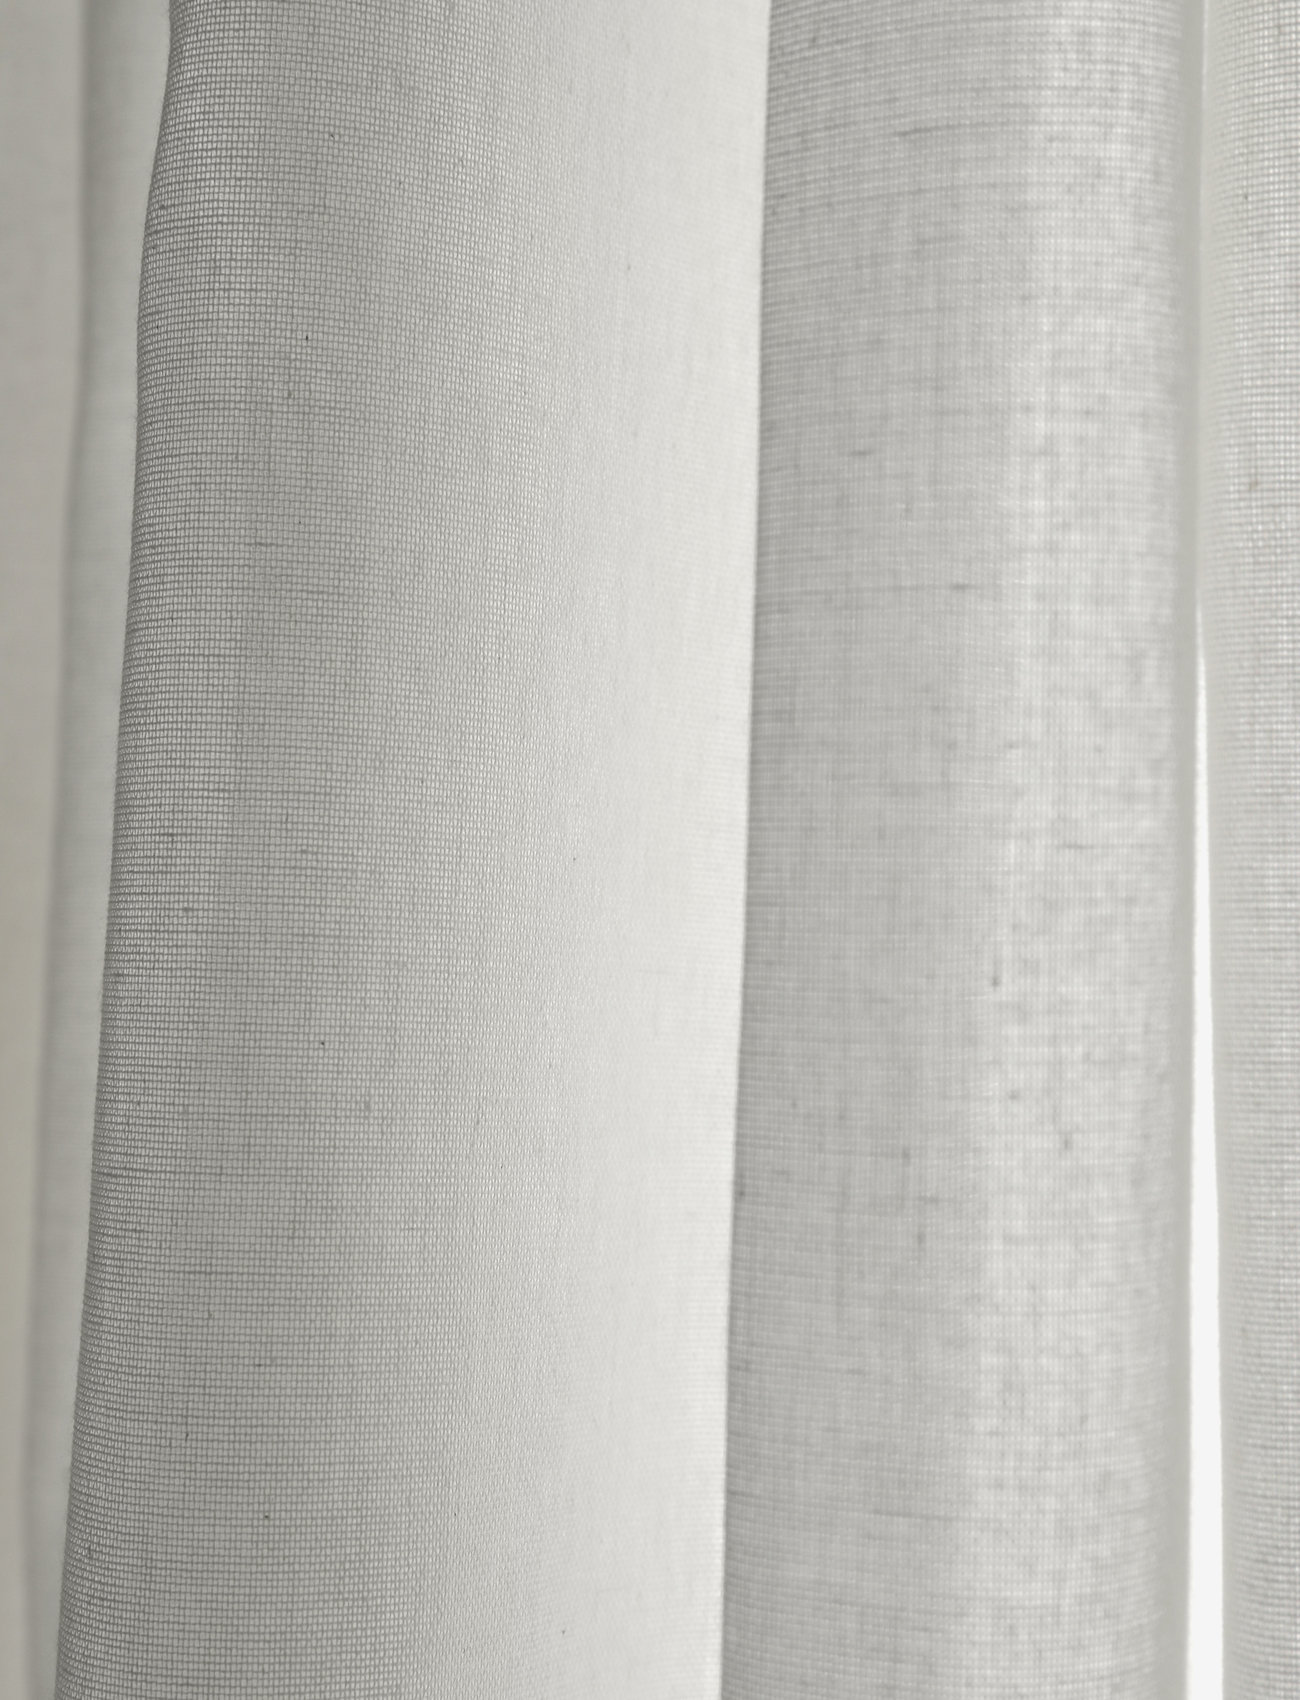 Mimou - Gardin Mimmi recycled - long curtains - natural white - 1